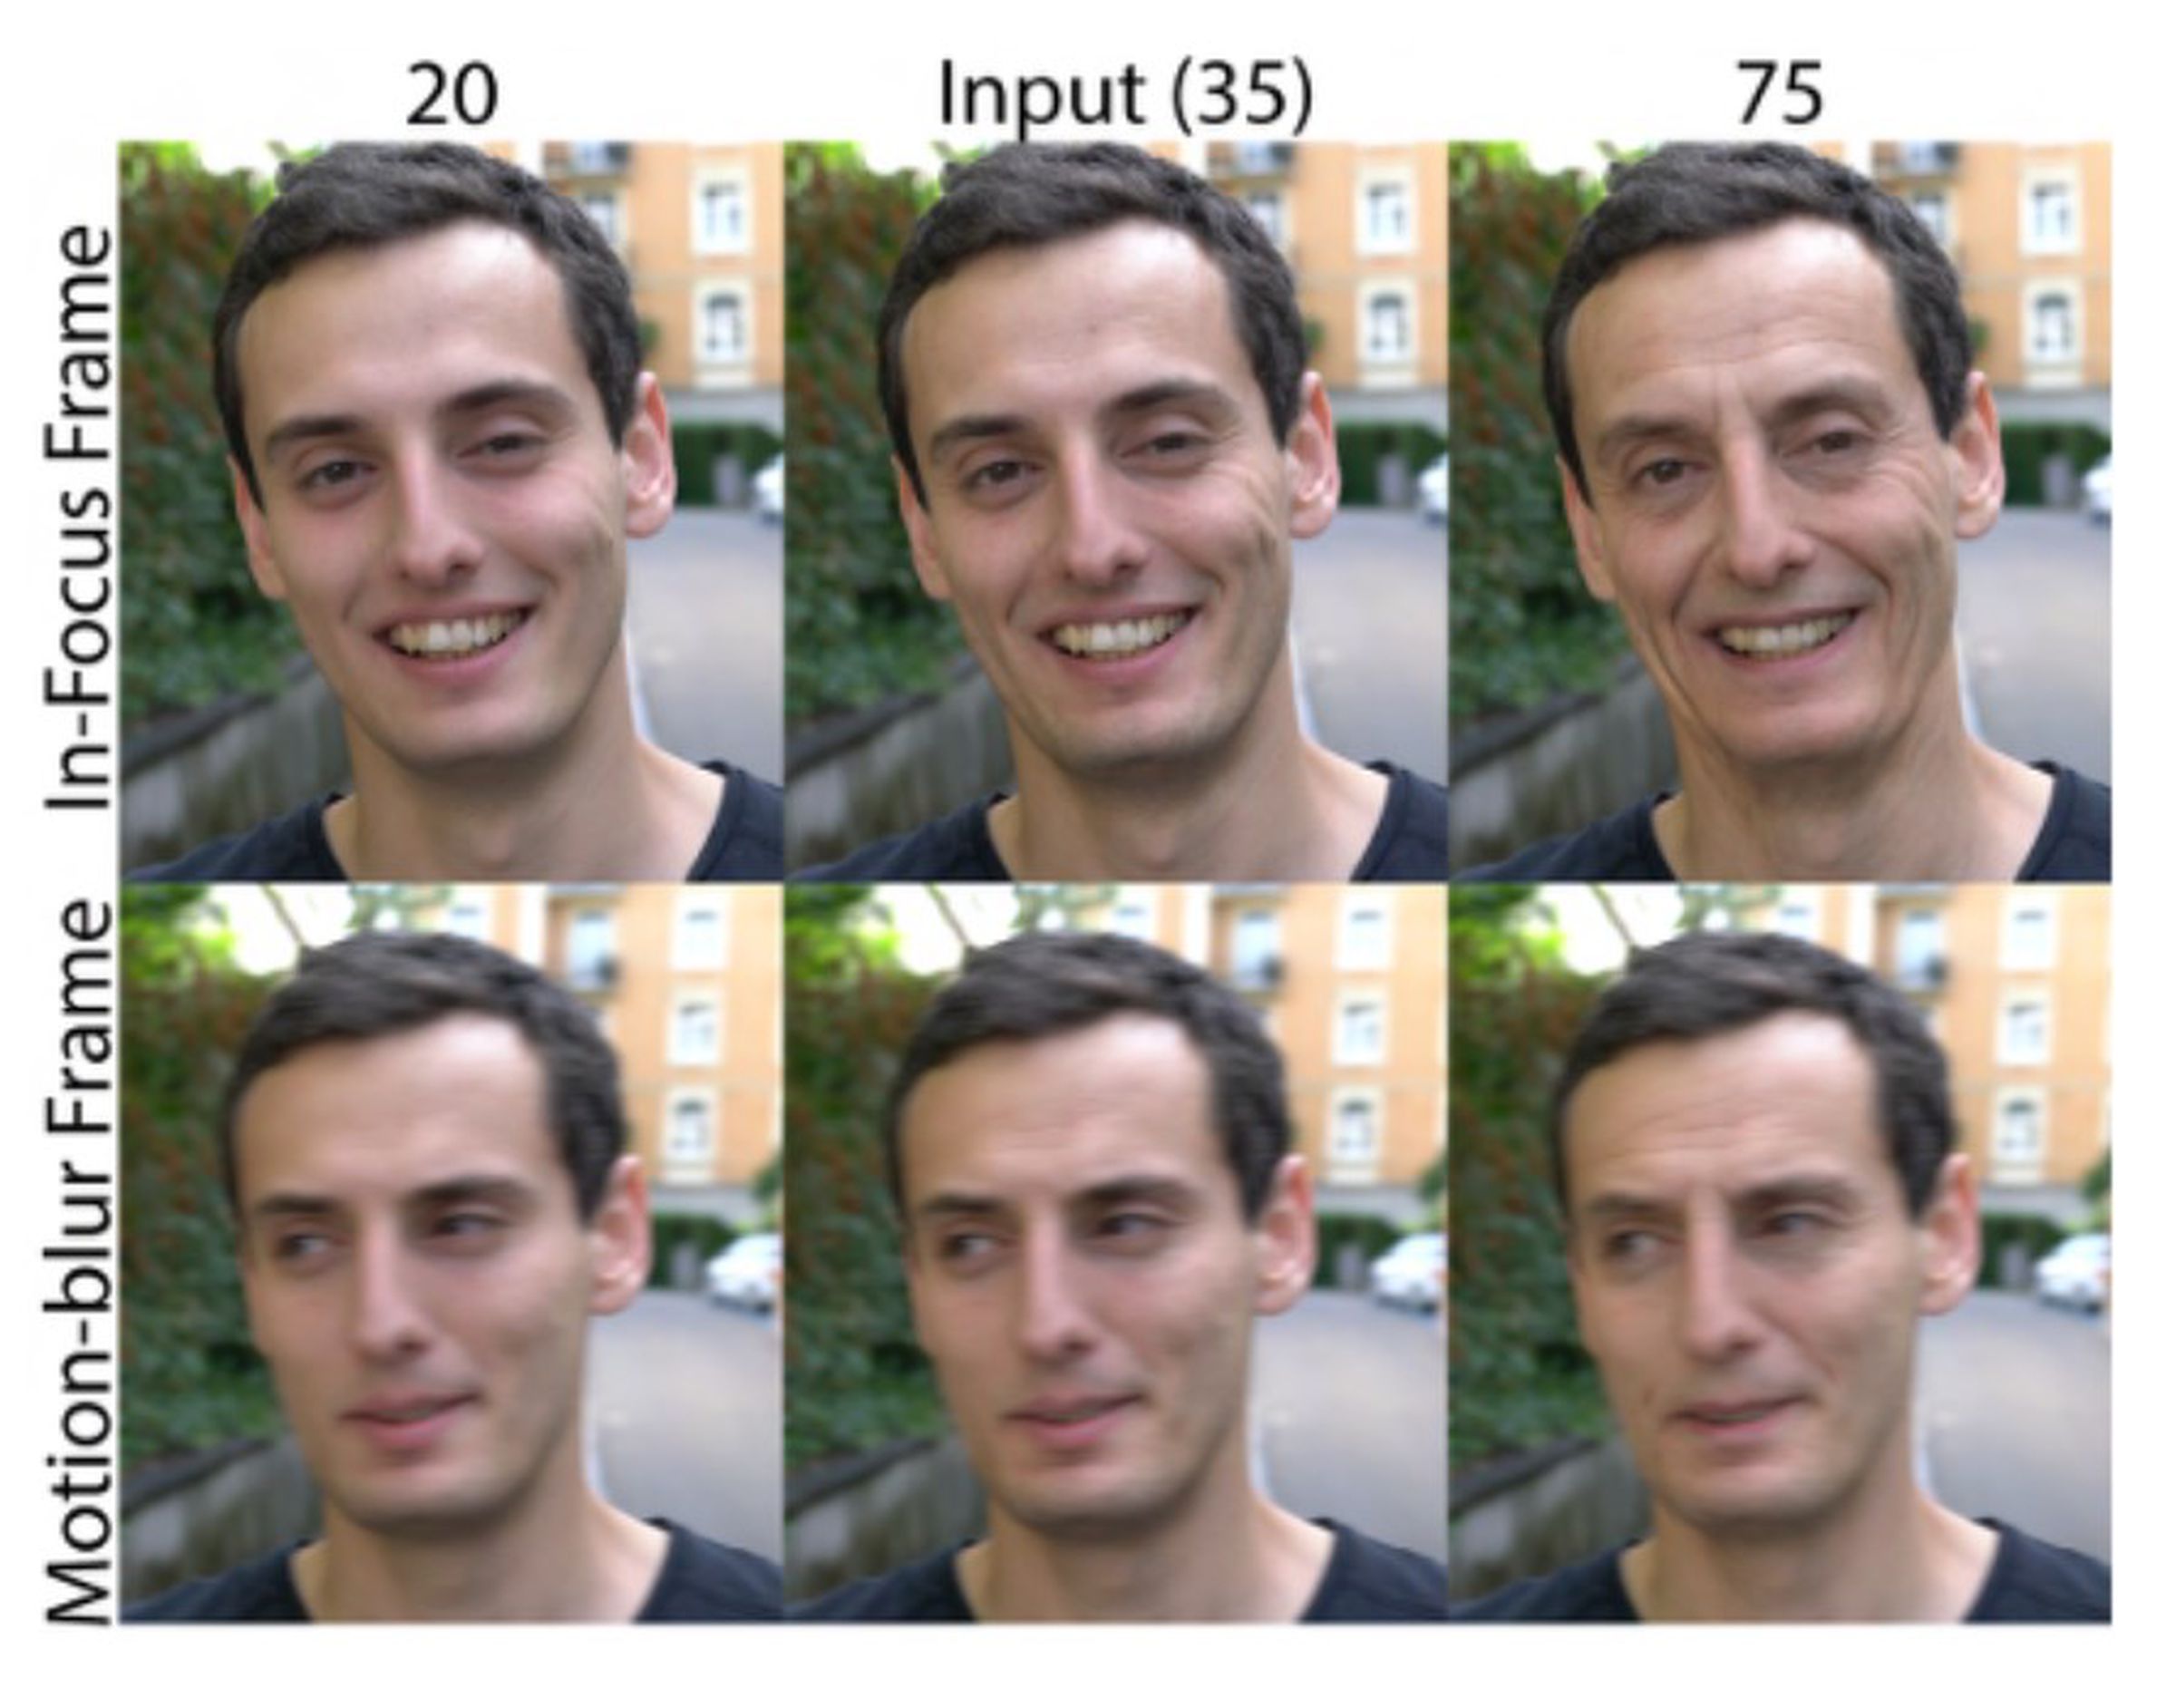 A man’s face aged from 20 to 75, with motion blur still showing the addition and subtraction of wrinkles.